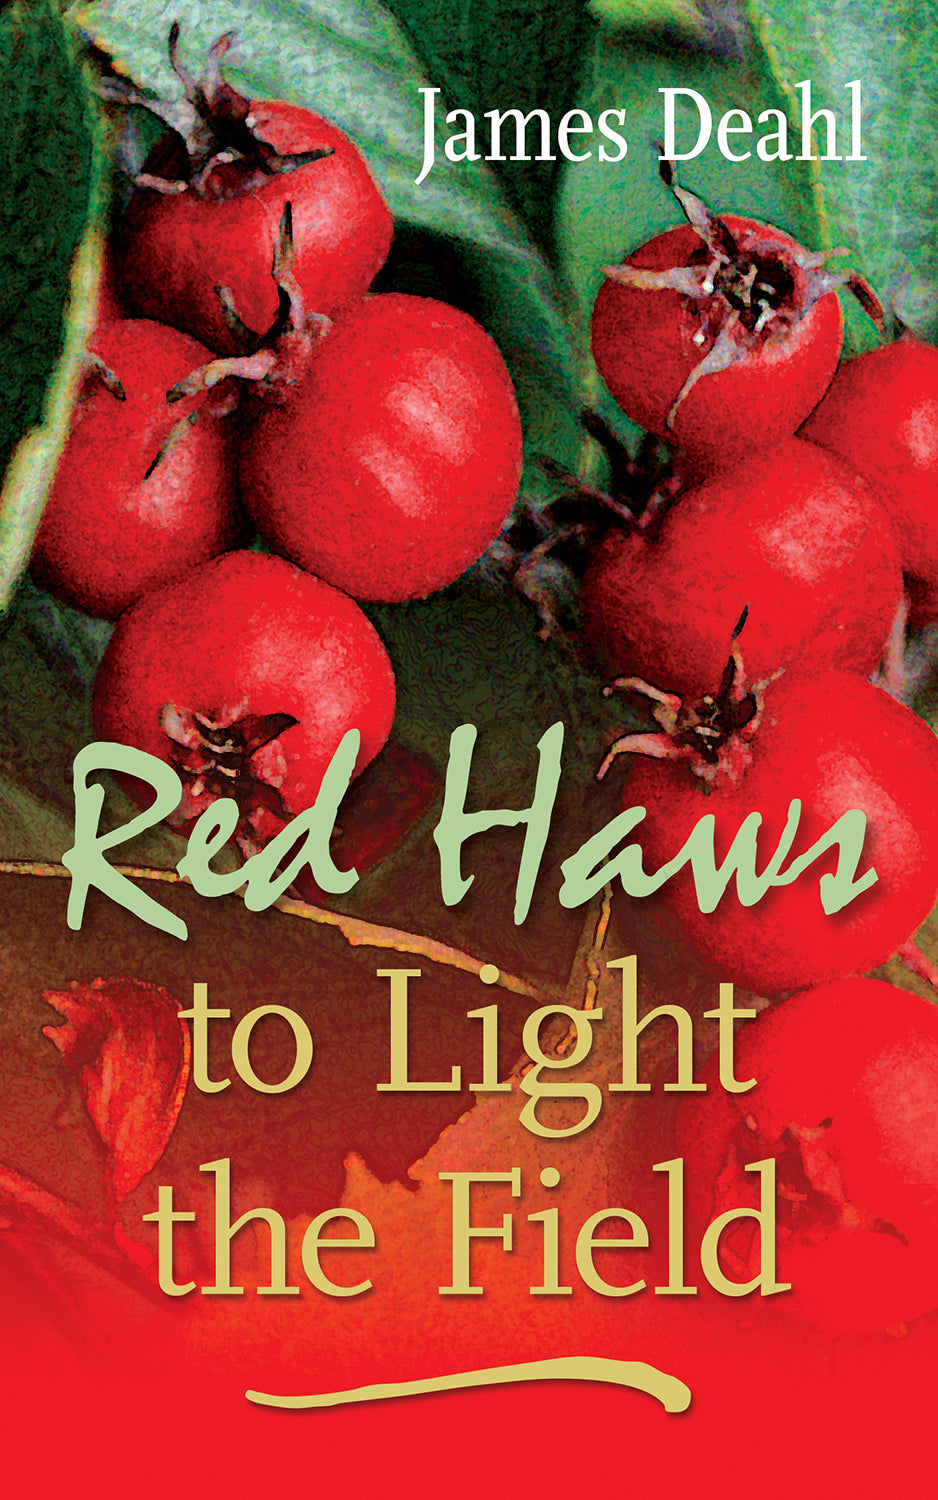 Red Haws to Light the Field